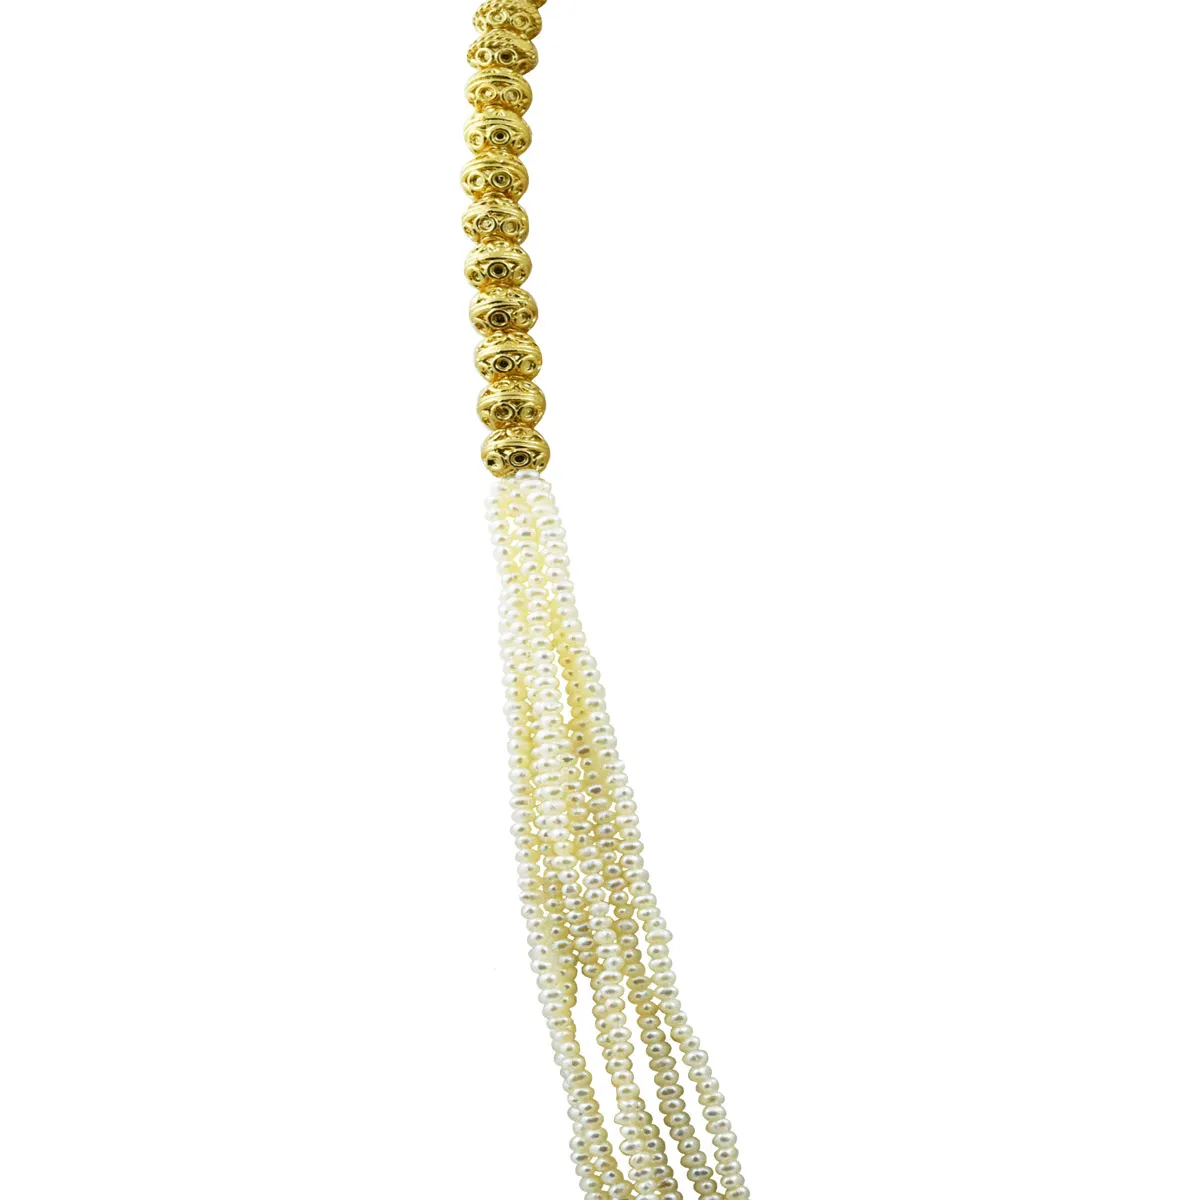 6 Line Real Freshwater Pearl Long Necklace with Gold Plated Balls for Women (SN1048)